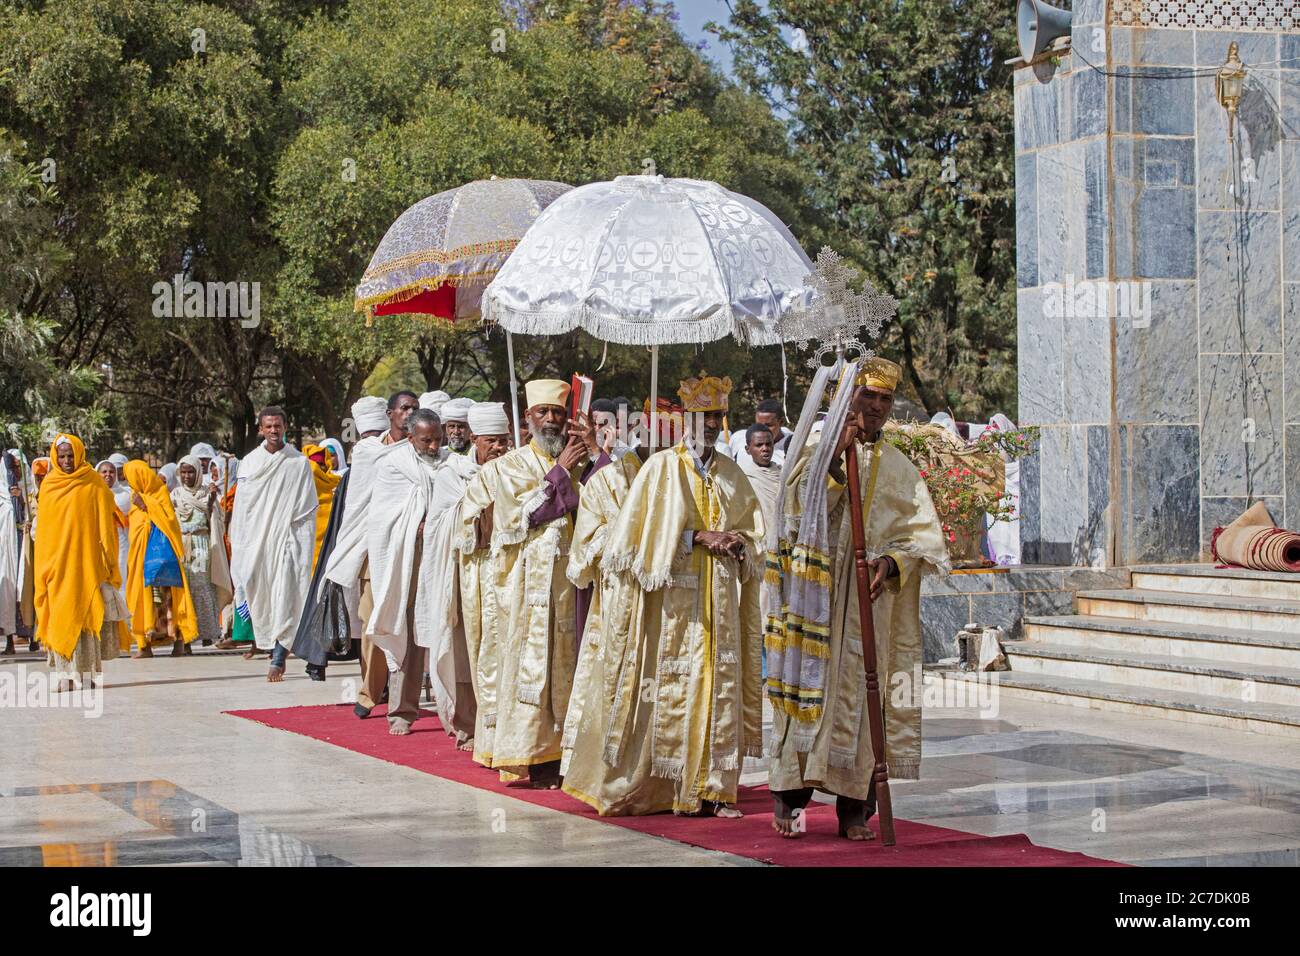 Orthodox priests with parasols during ceremony walking around the Church of Our Lady Mary of Zion, Axum / Aksum, Tigray Region, Ethiopia, Africa Stock Photo